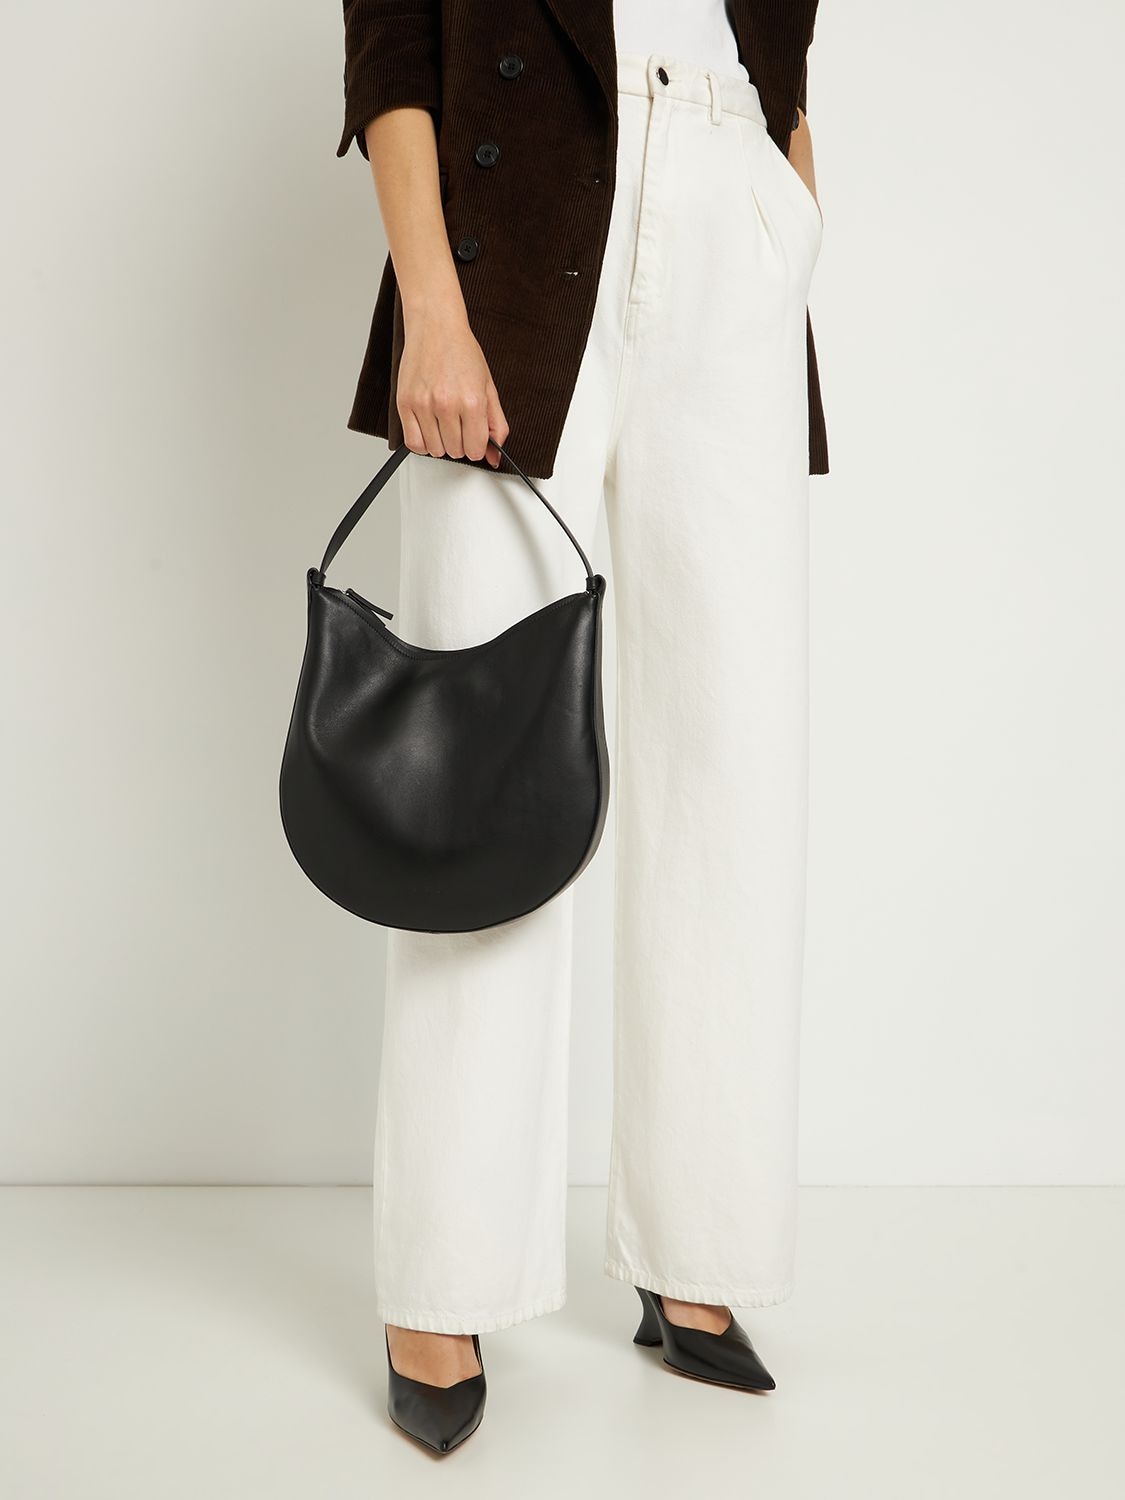 Aesther Ekme Mini Hobo Smooth Leather Shoulder Bag In Загар